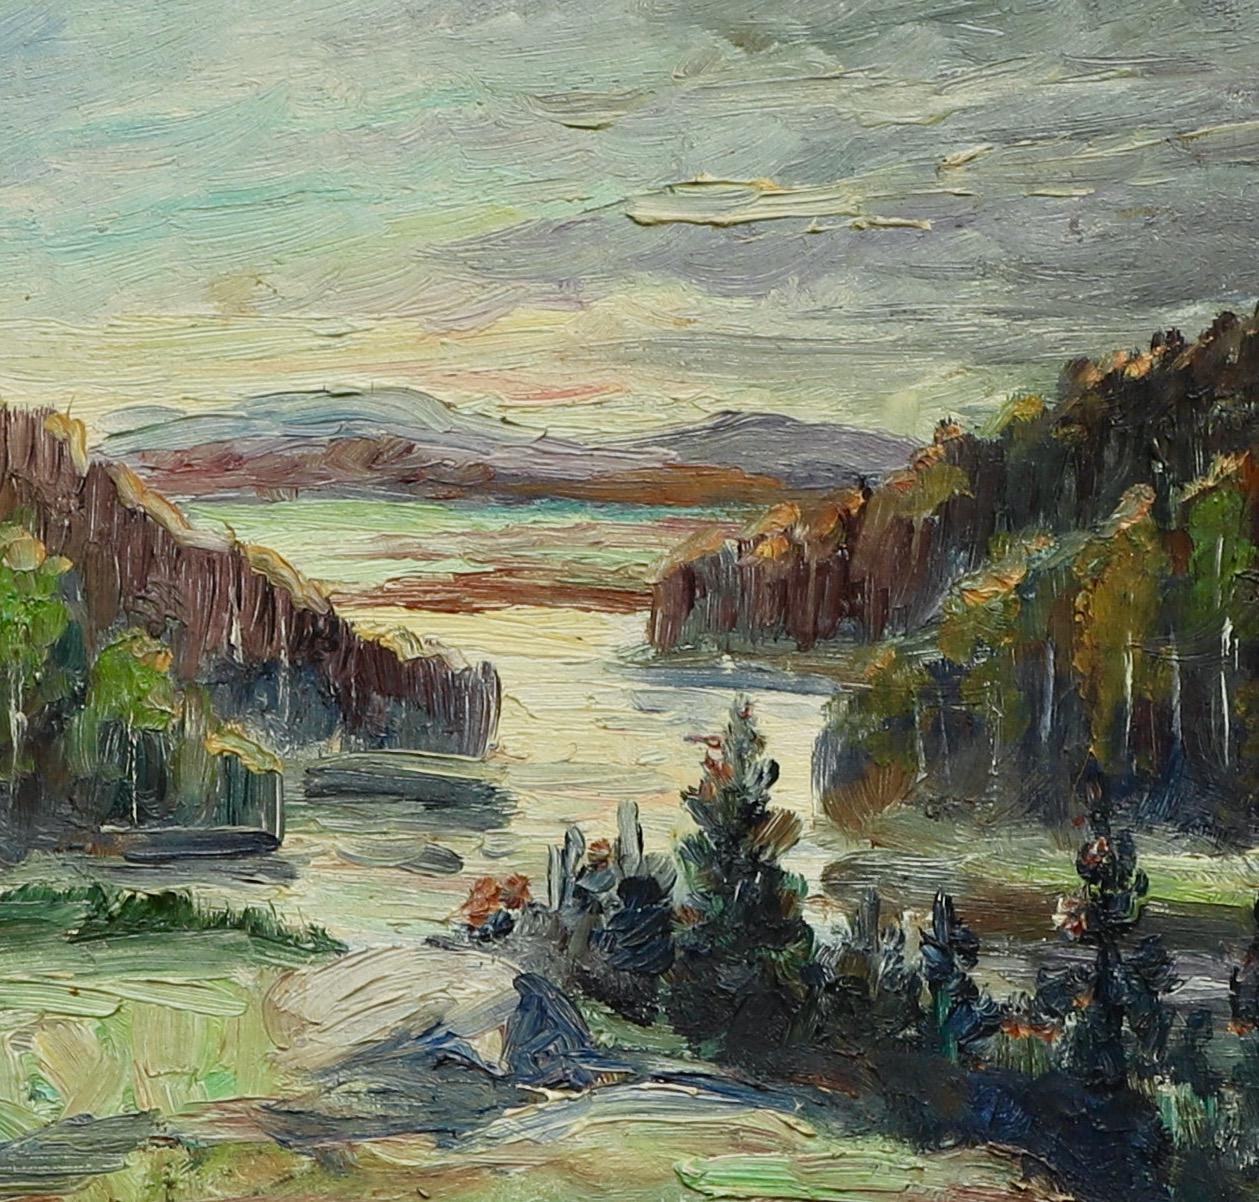 A mountainous landscape painted by Hilding Elof Nyman (1870 - 1937). Oil on panel. The motif is probably from Dalarna in Swedens  north part were he spent periods of his life. Nyman was a Swedish painter, draftsman and graphic artist.
Hilding Nyman